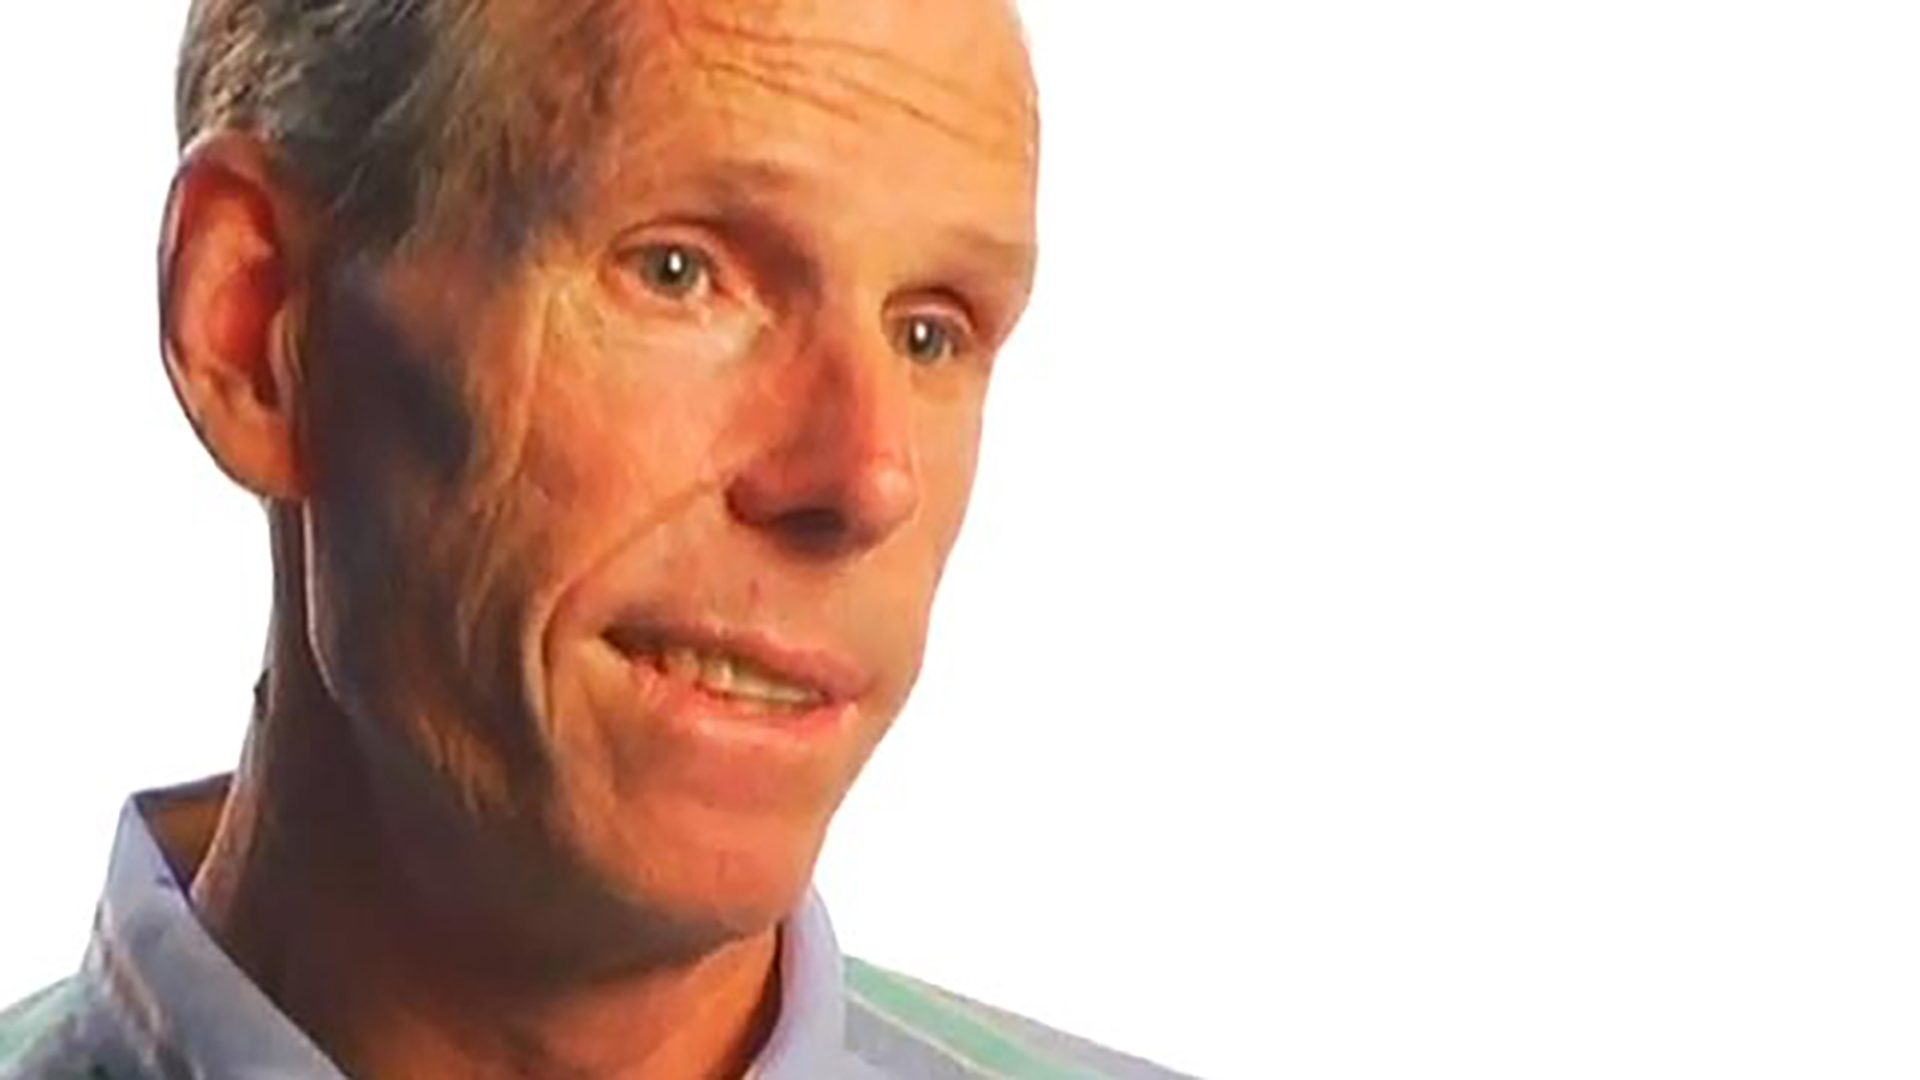 A middle-aged man wearing a pastel collared shirt is interviewed against a white background.